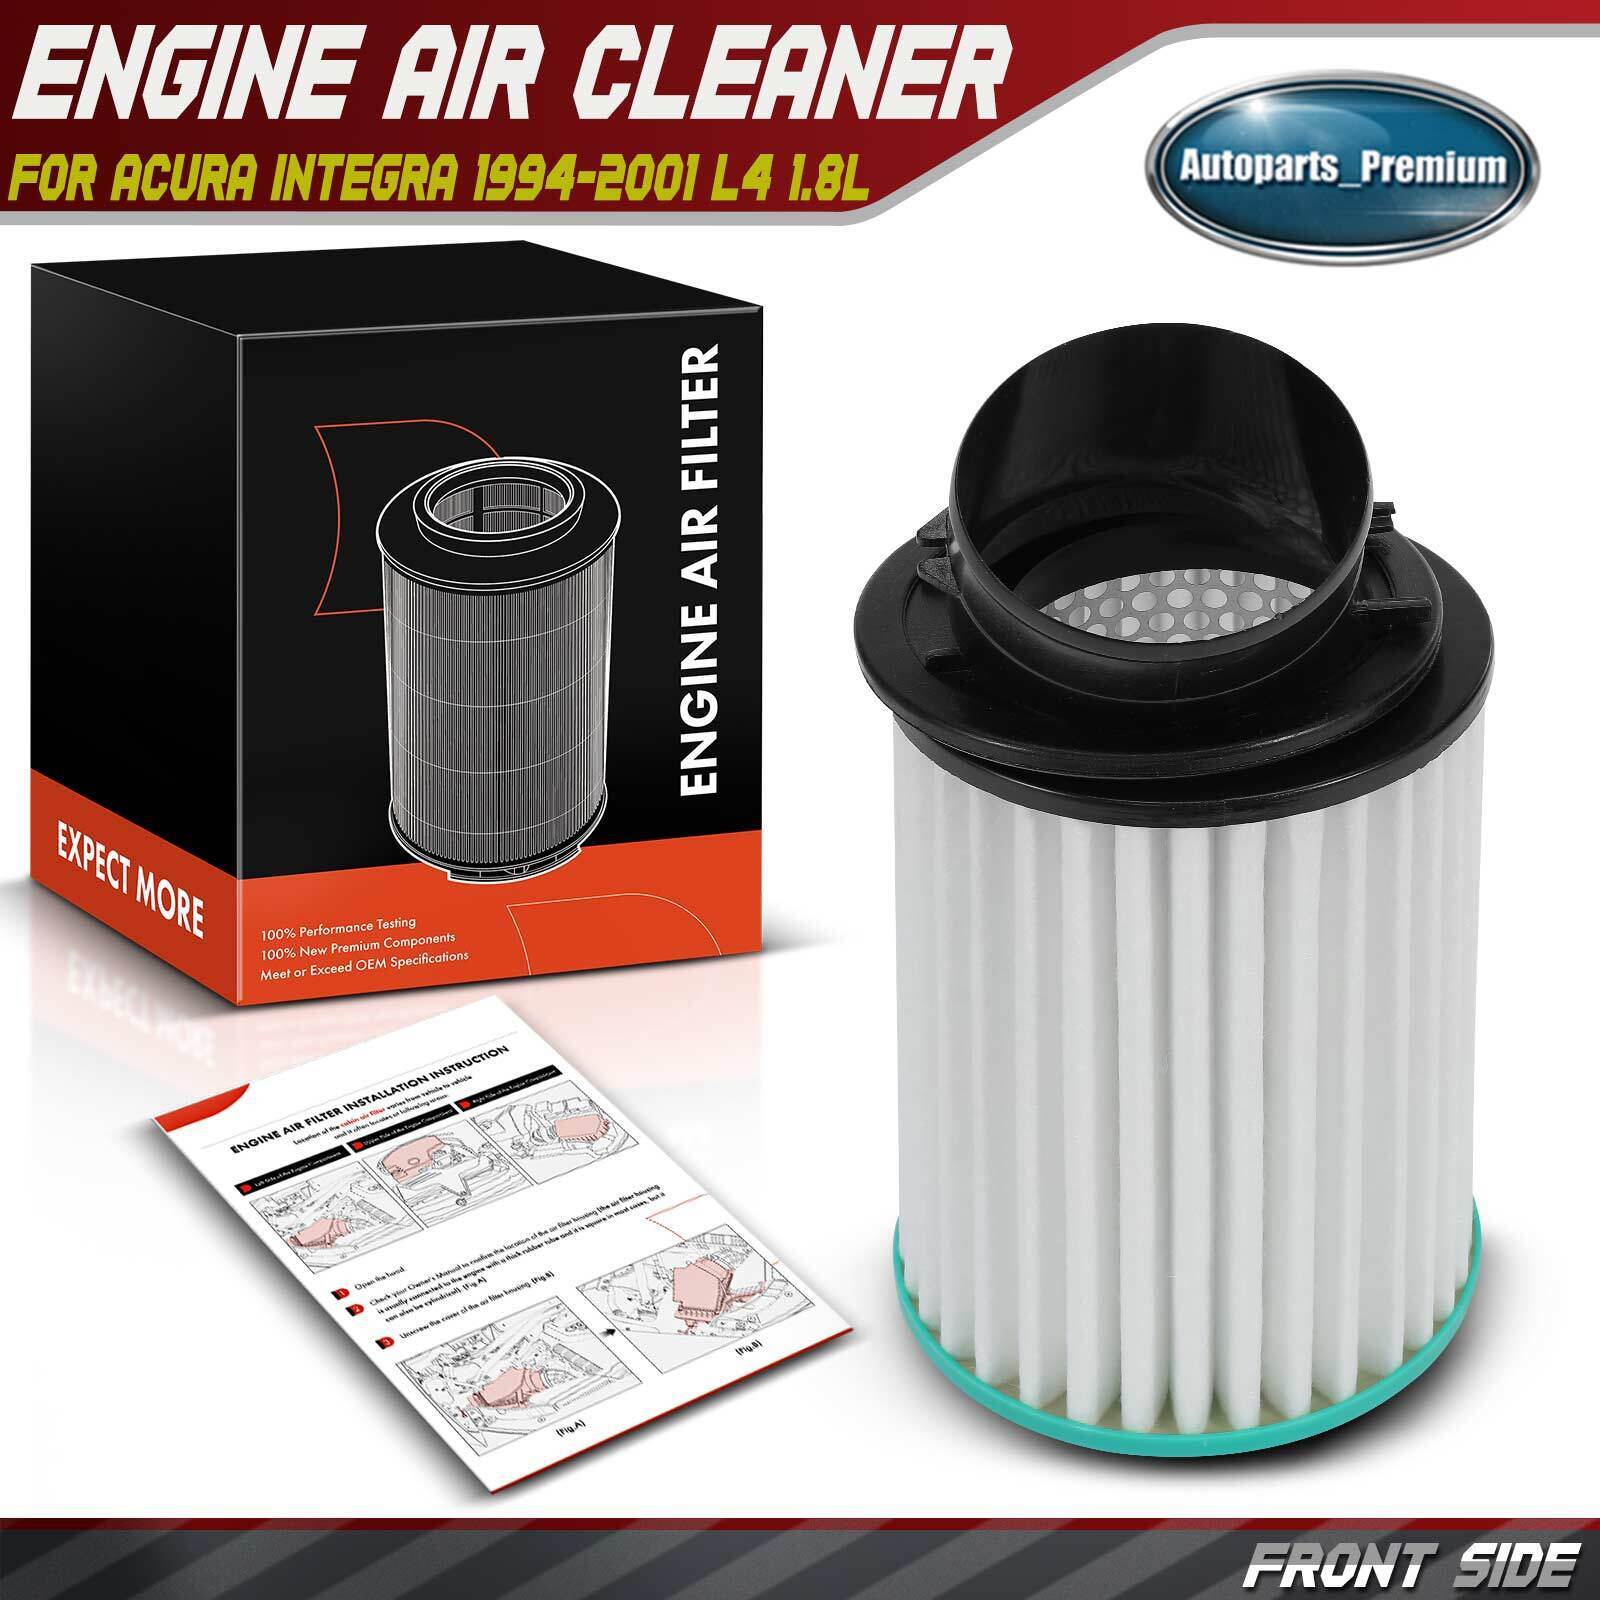 Engine Air Filter for Acura Integra 1994 1995 1996 1997 1998 1999-2001 L4 1.8L